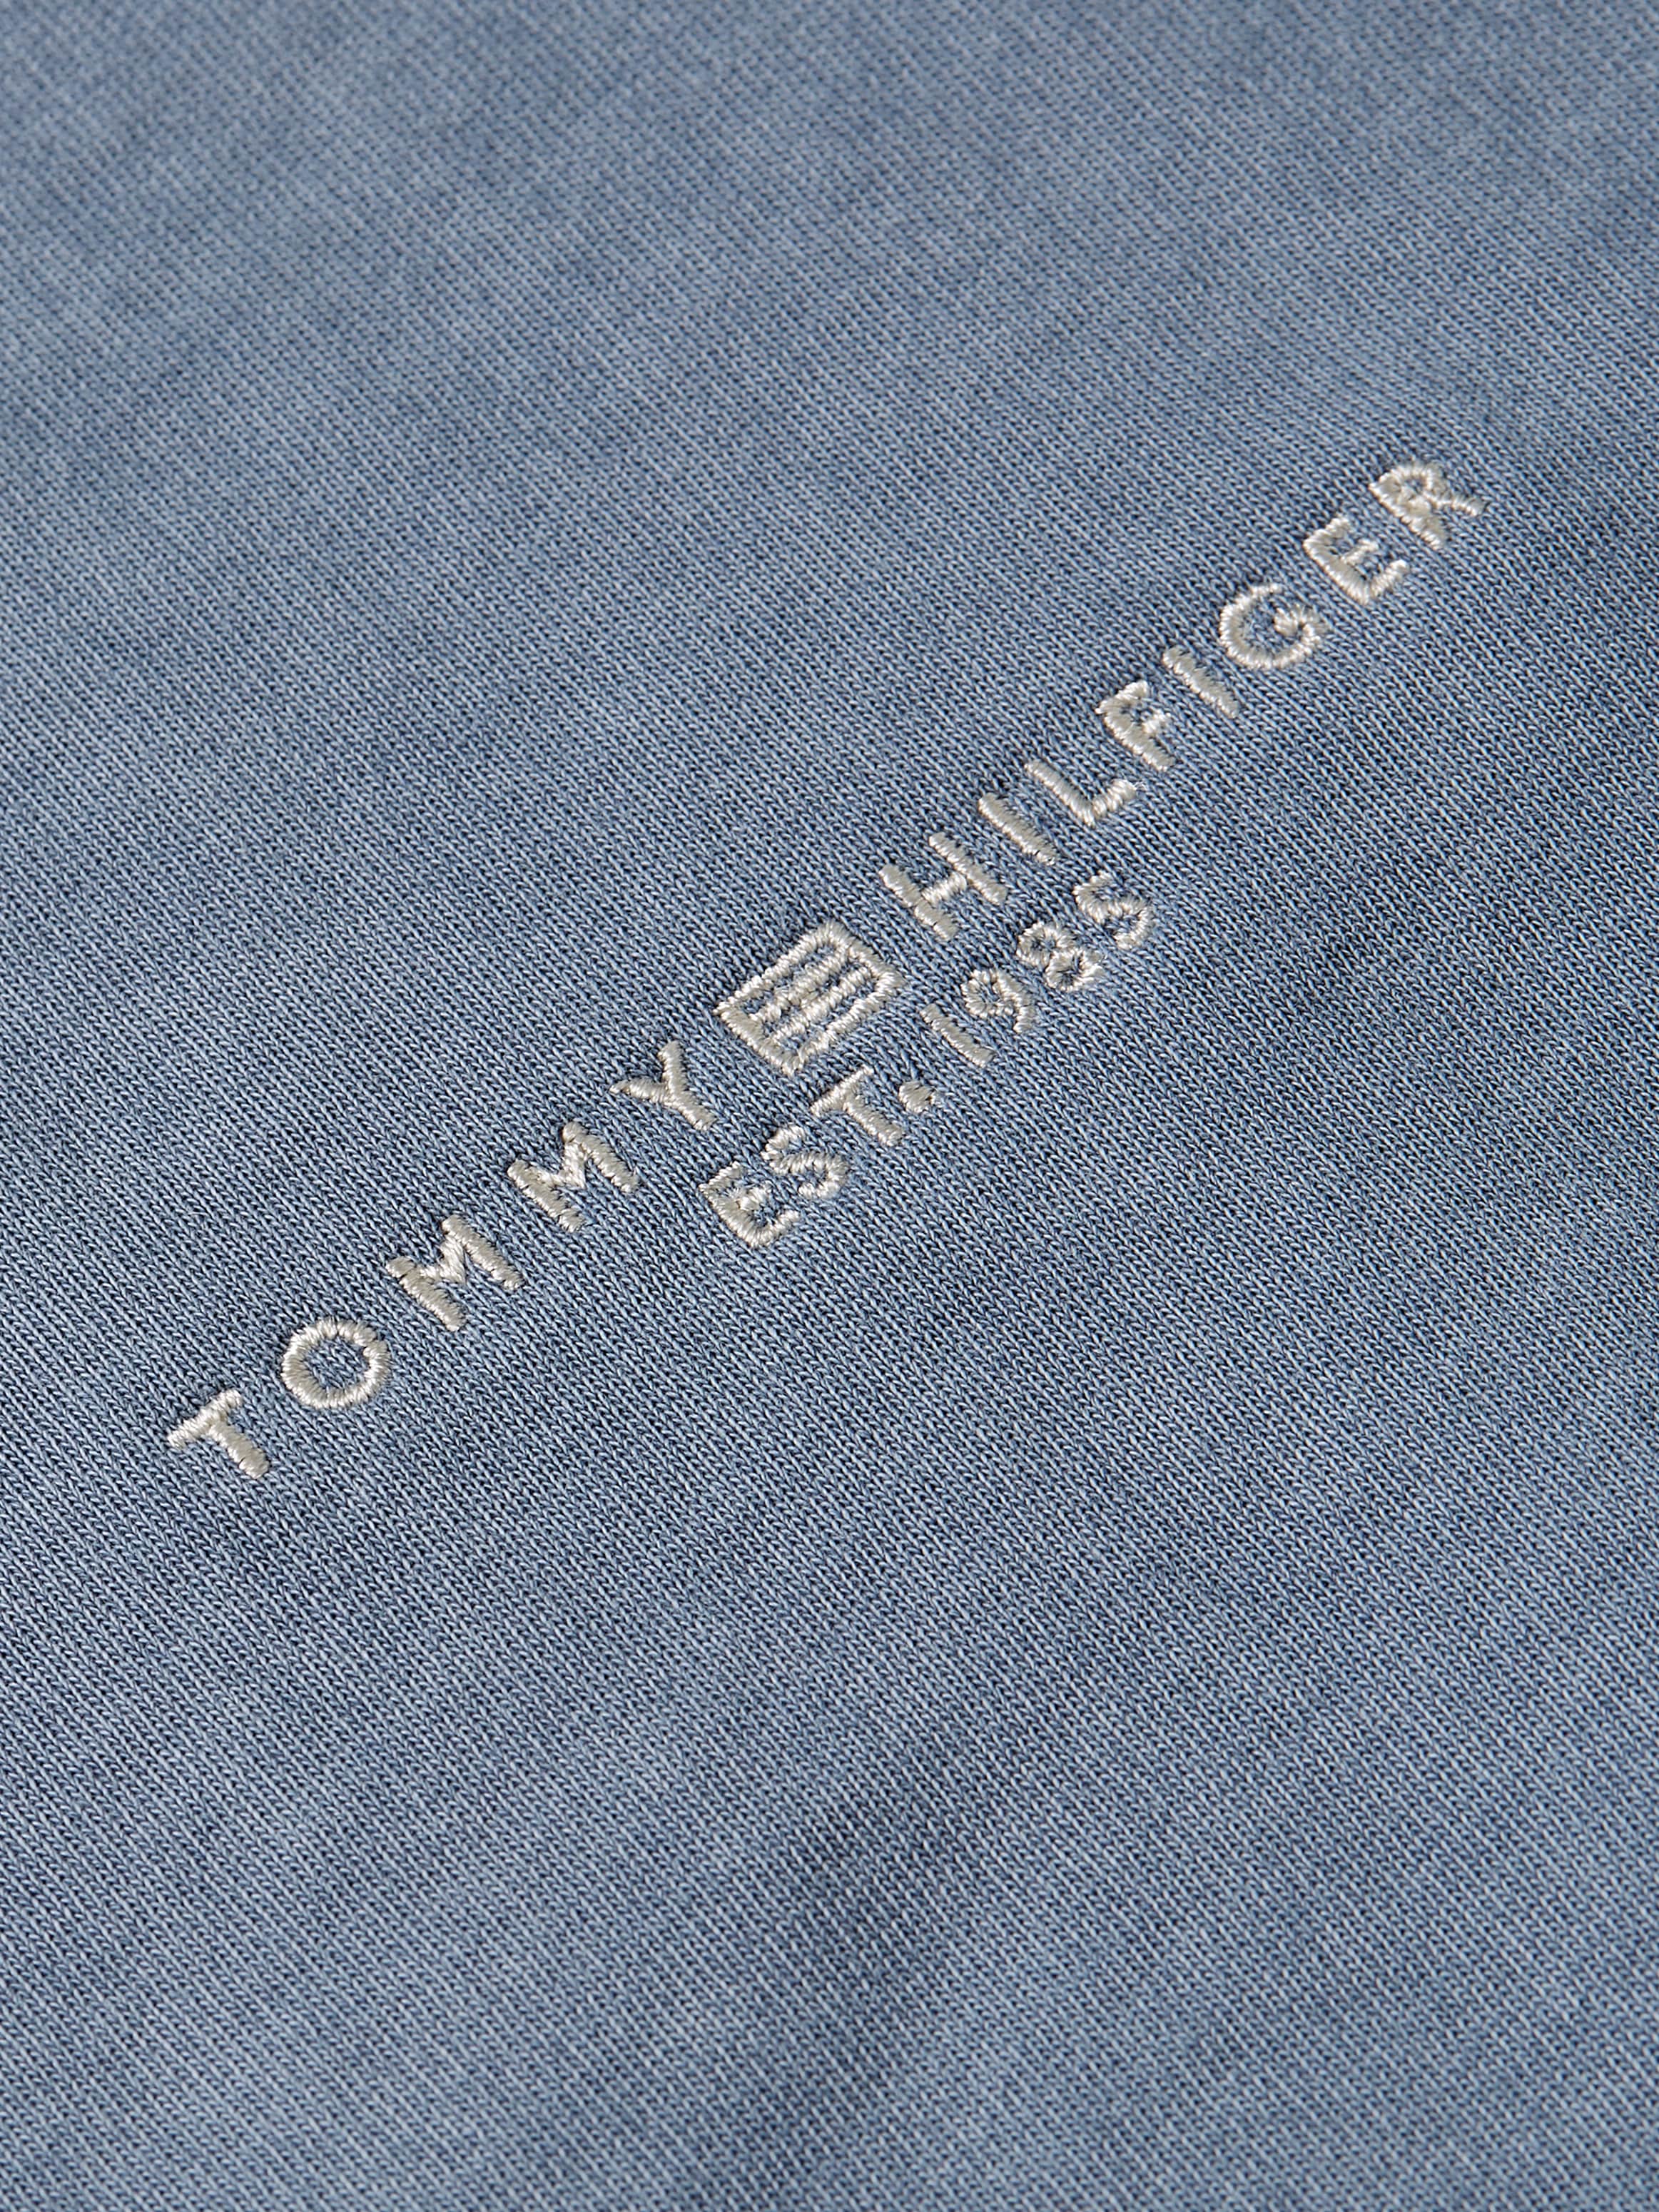 Tommy Hilfiger T-Shirt »REG MUTED GMD CORP LOGO C-NK SS«, in Washed-Optik